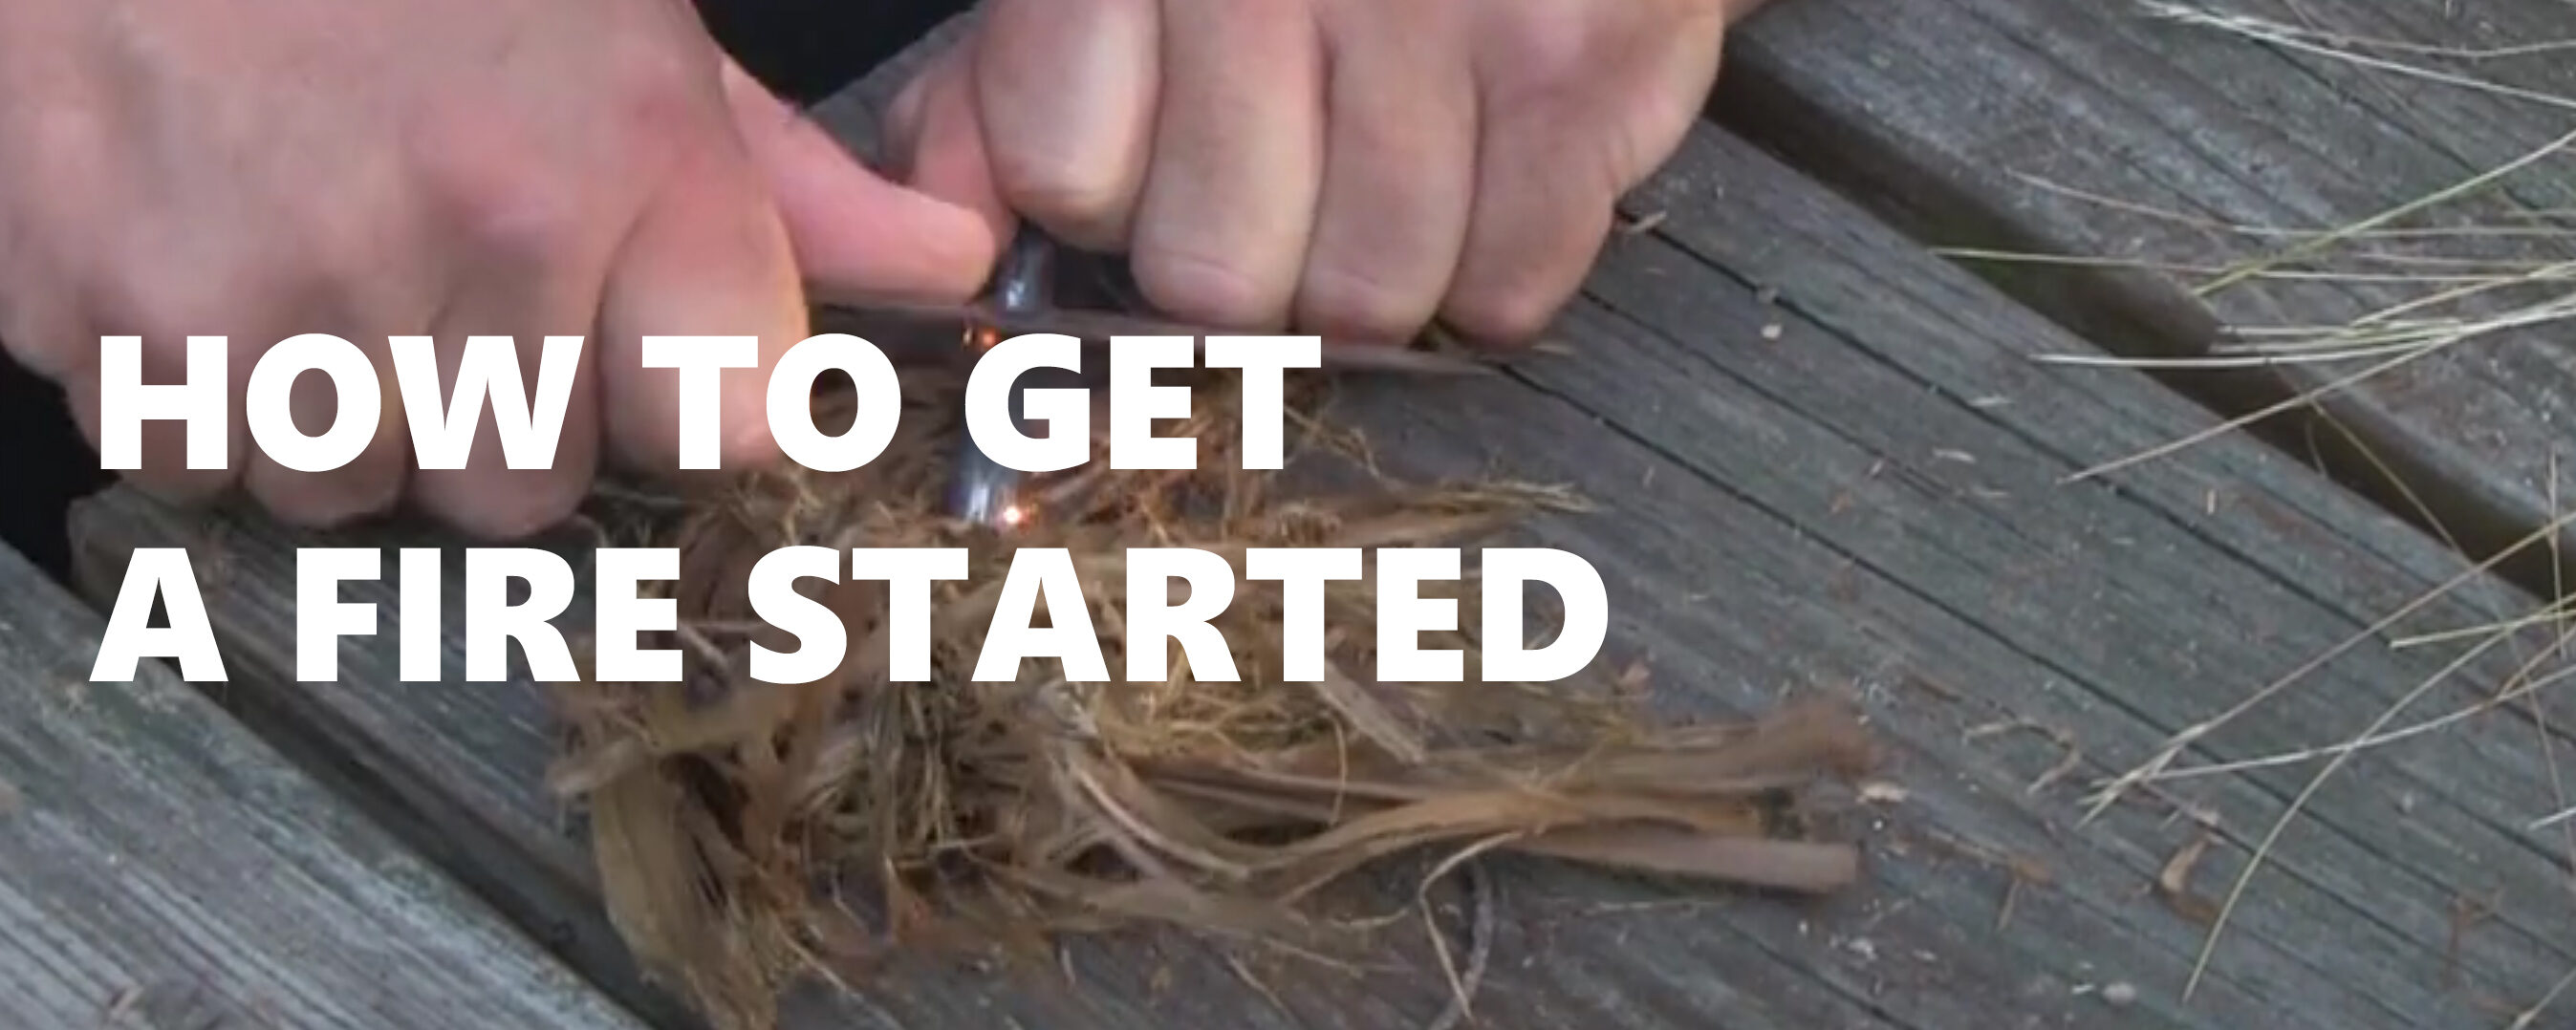 How To Get a Fire Started